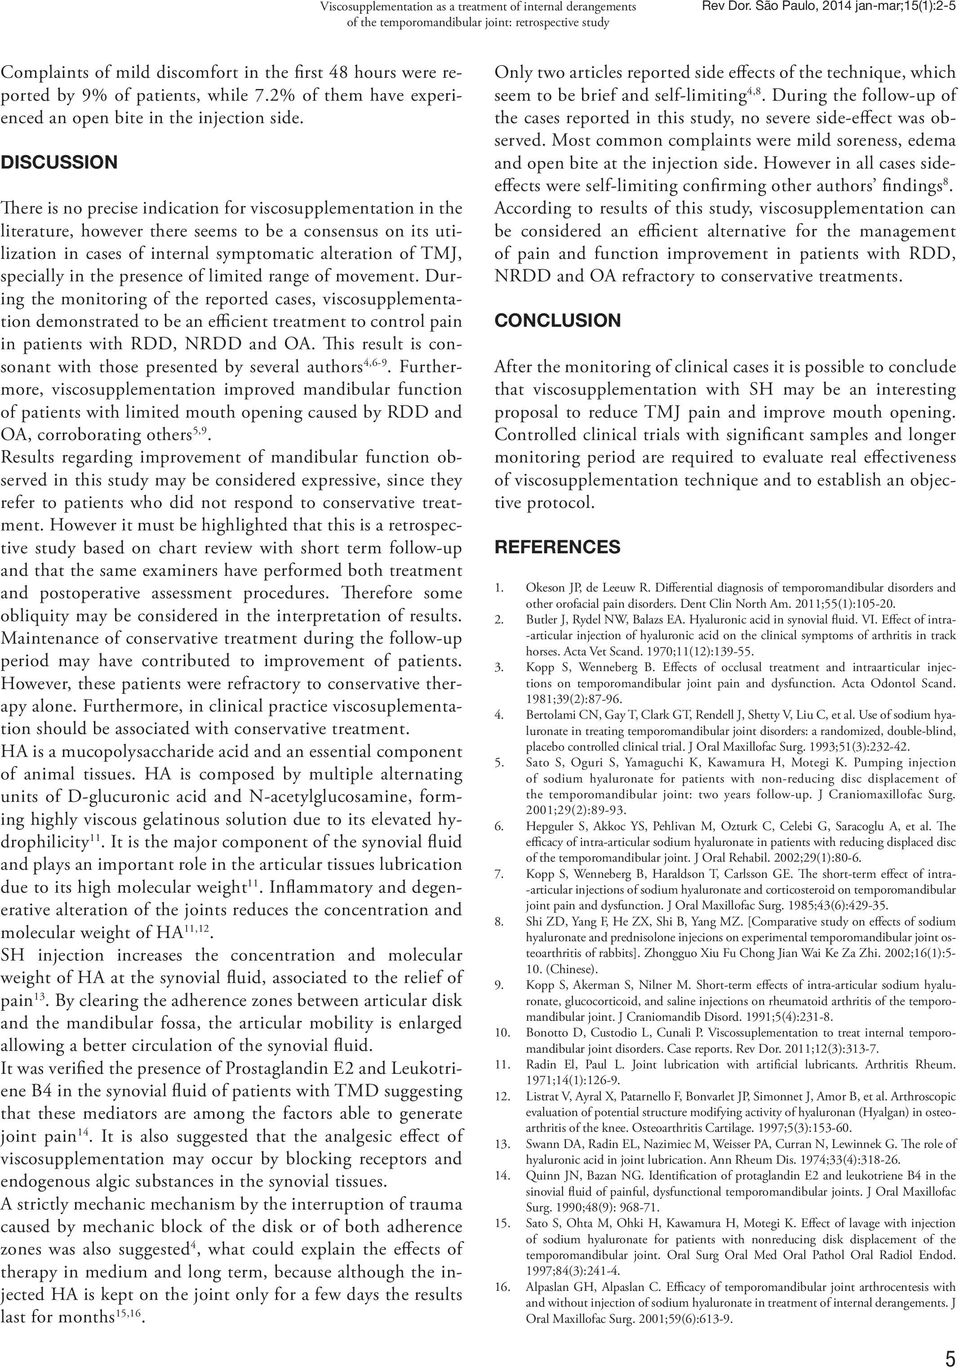 DISCUSSION There is no precise indication for viscosupplementation in the literature, however there seems to be a consensus on its utilization in cases of internal symptomatic alteration of TMJ,